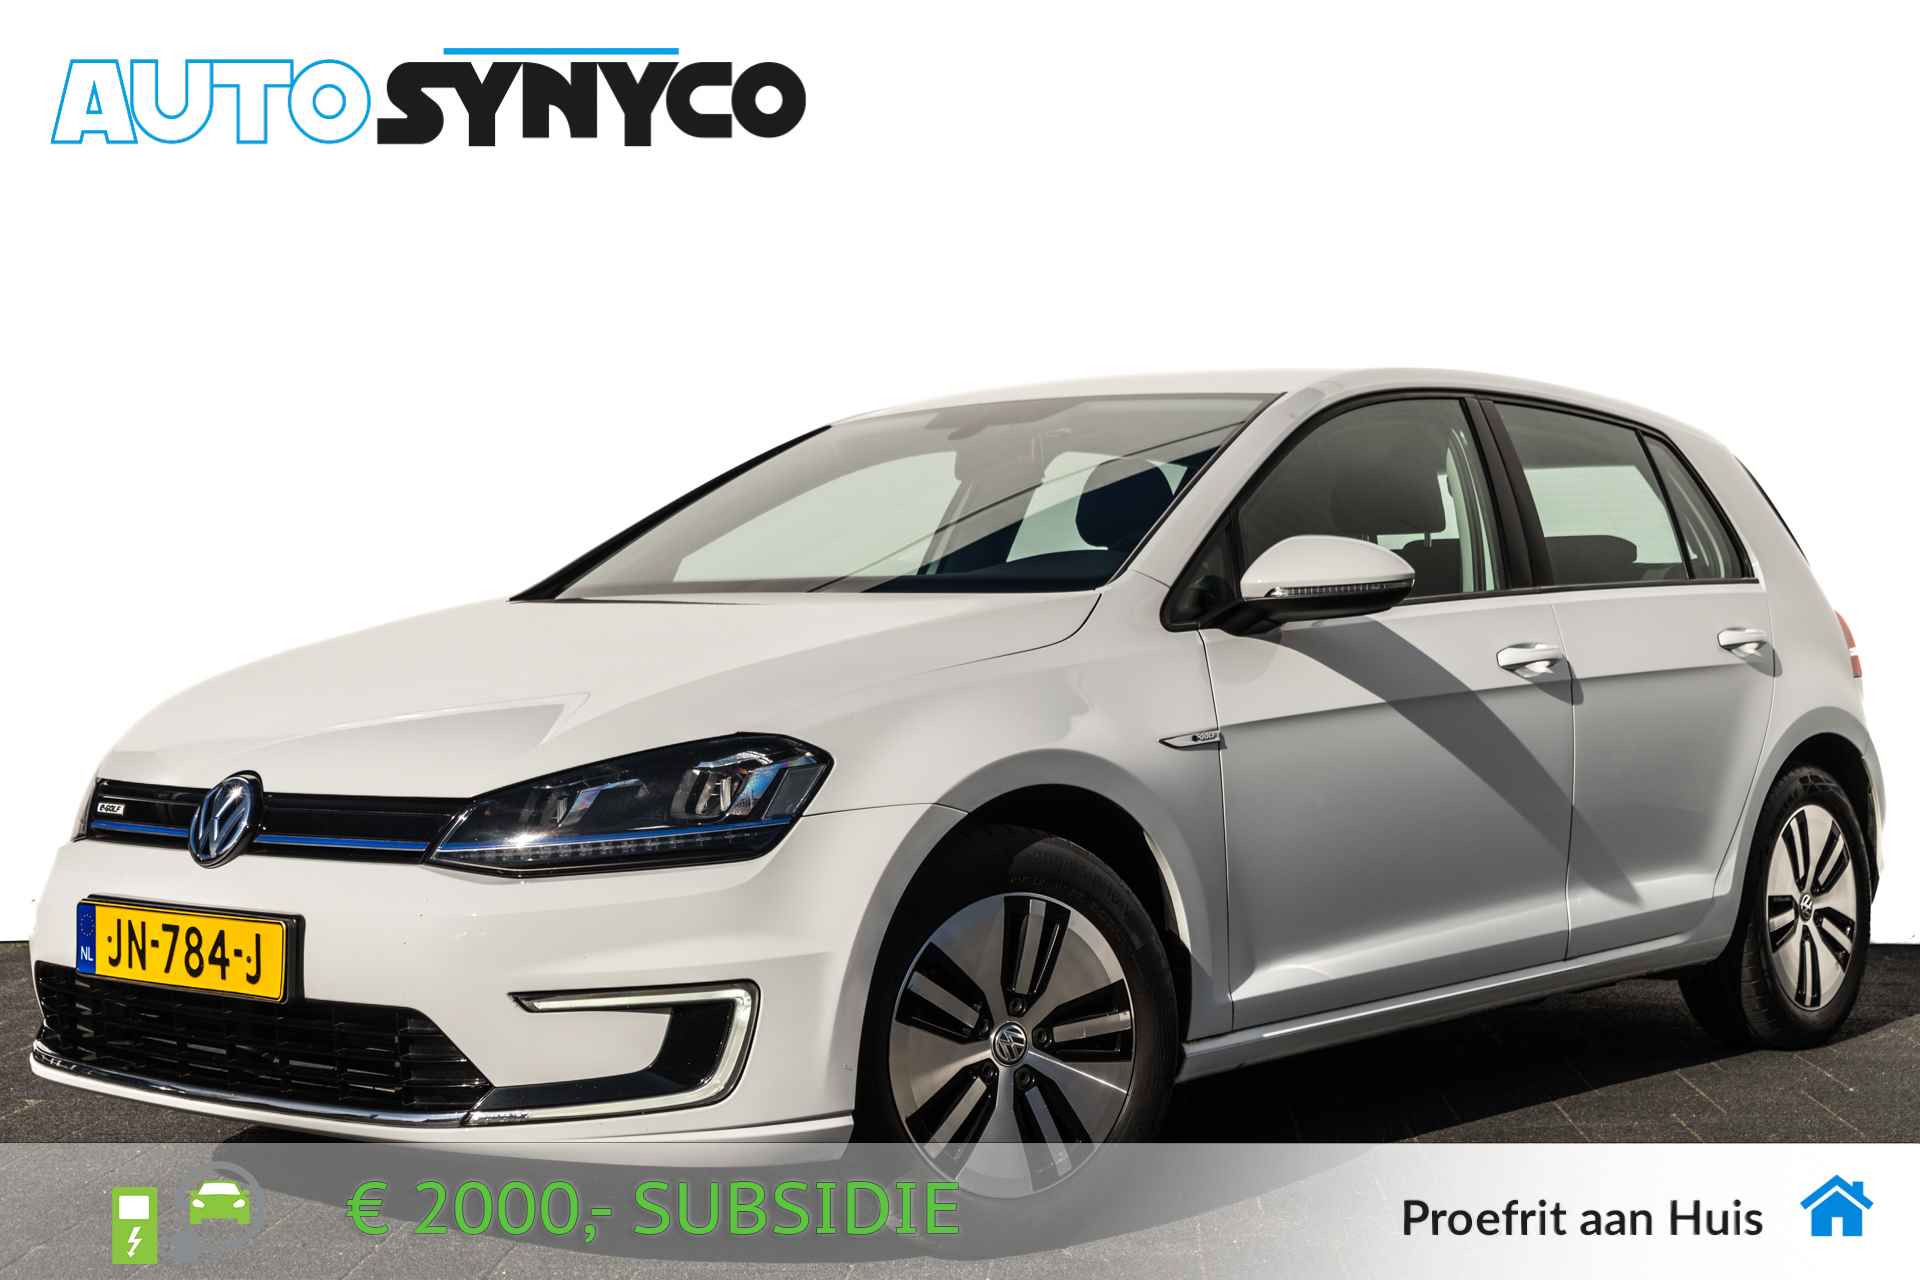 Volkswagen e-Golf e-Golf 24 Kwh | LED | 2.000,- Subsidie | Navigatie | Climate Control - 1/36